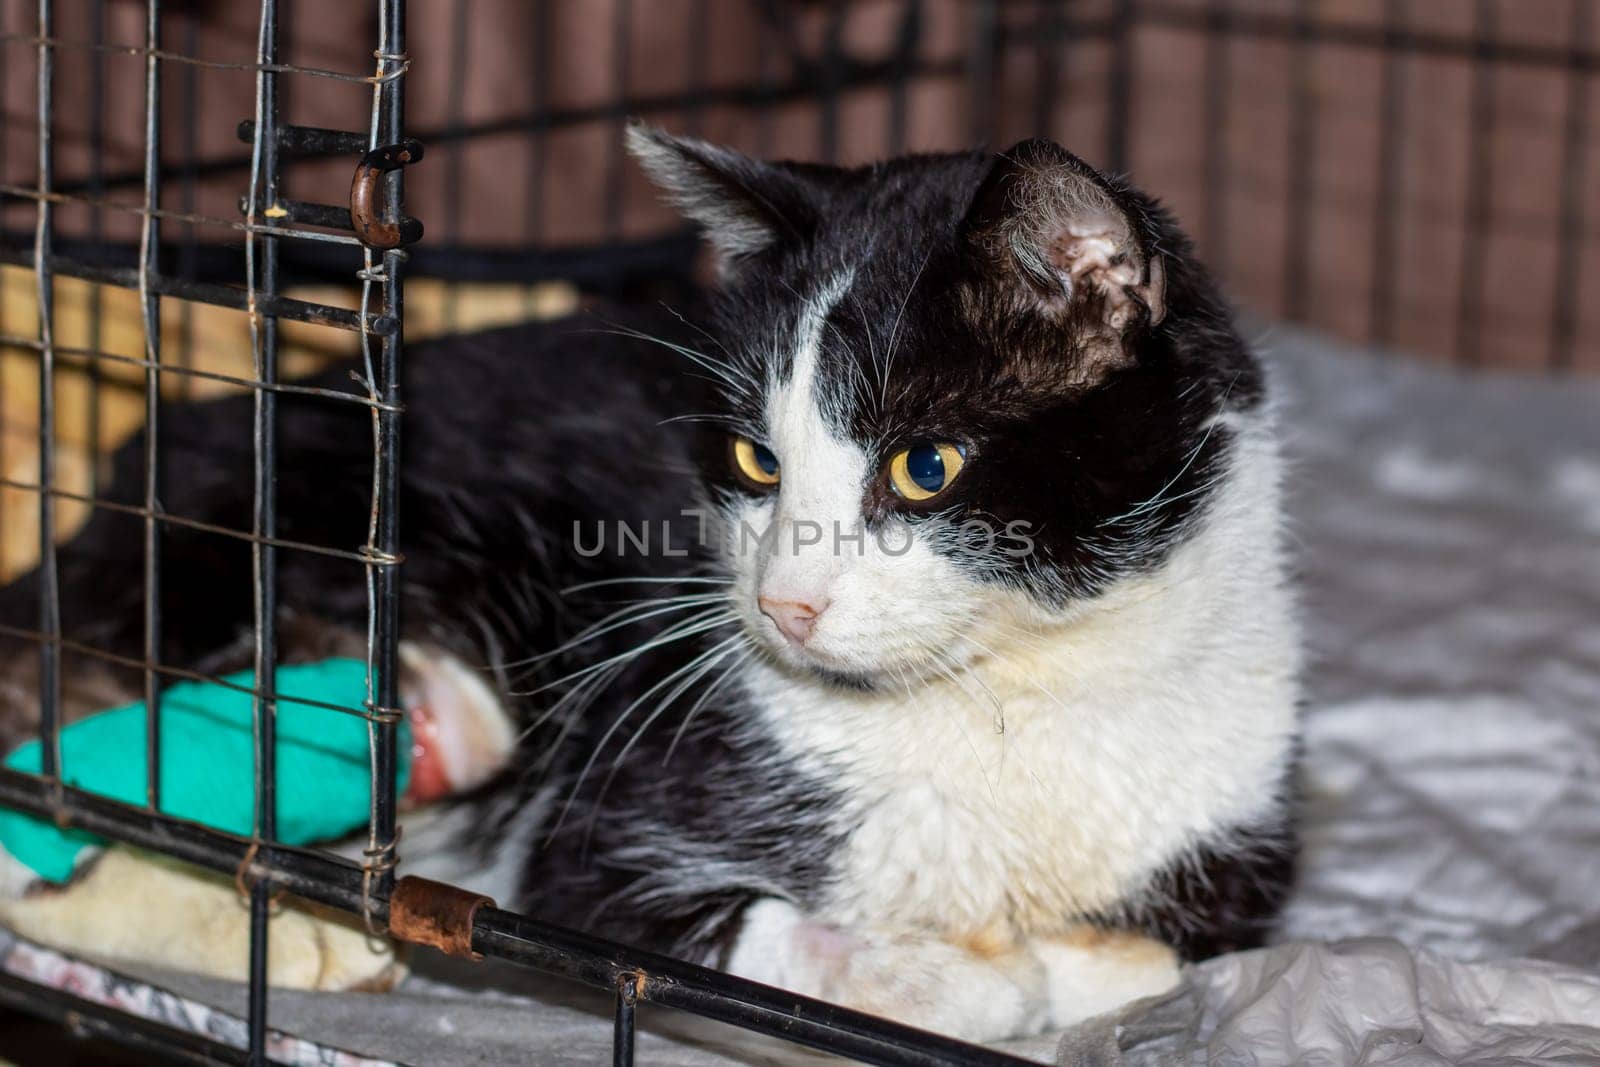 A black and white Domestic shorthaired cat with green eyes and whiskers is lounging in a cage, showcasing its carnivorous nature and sleek fur